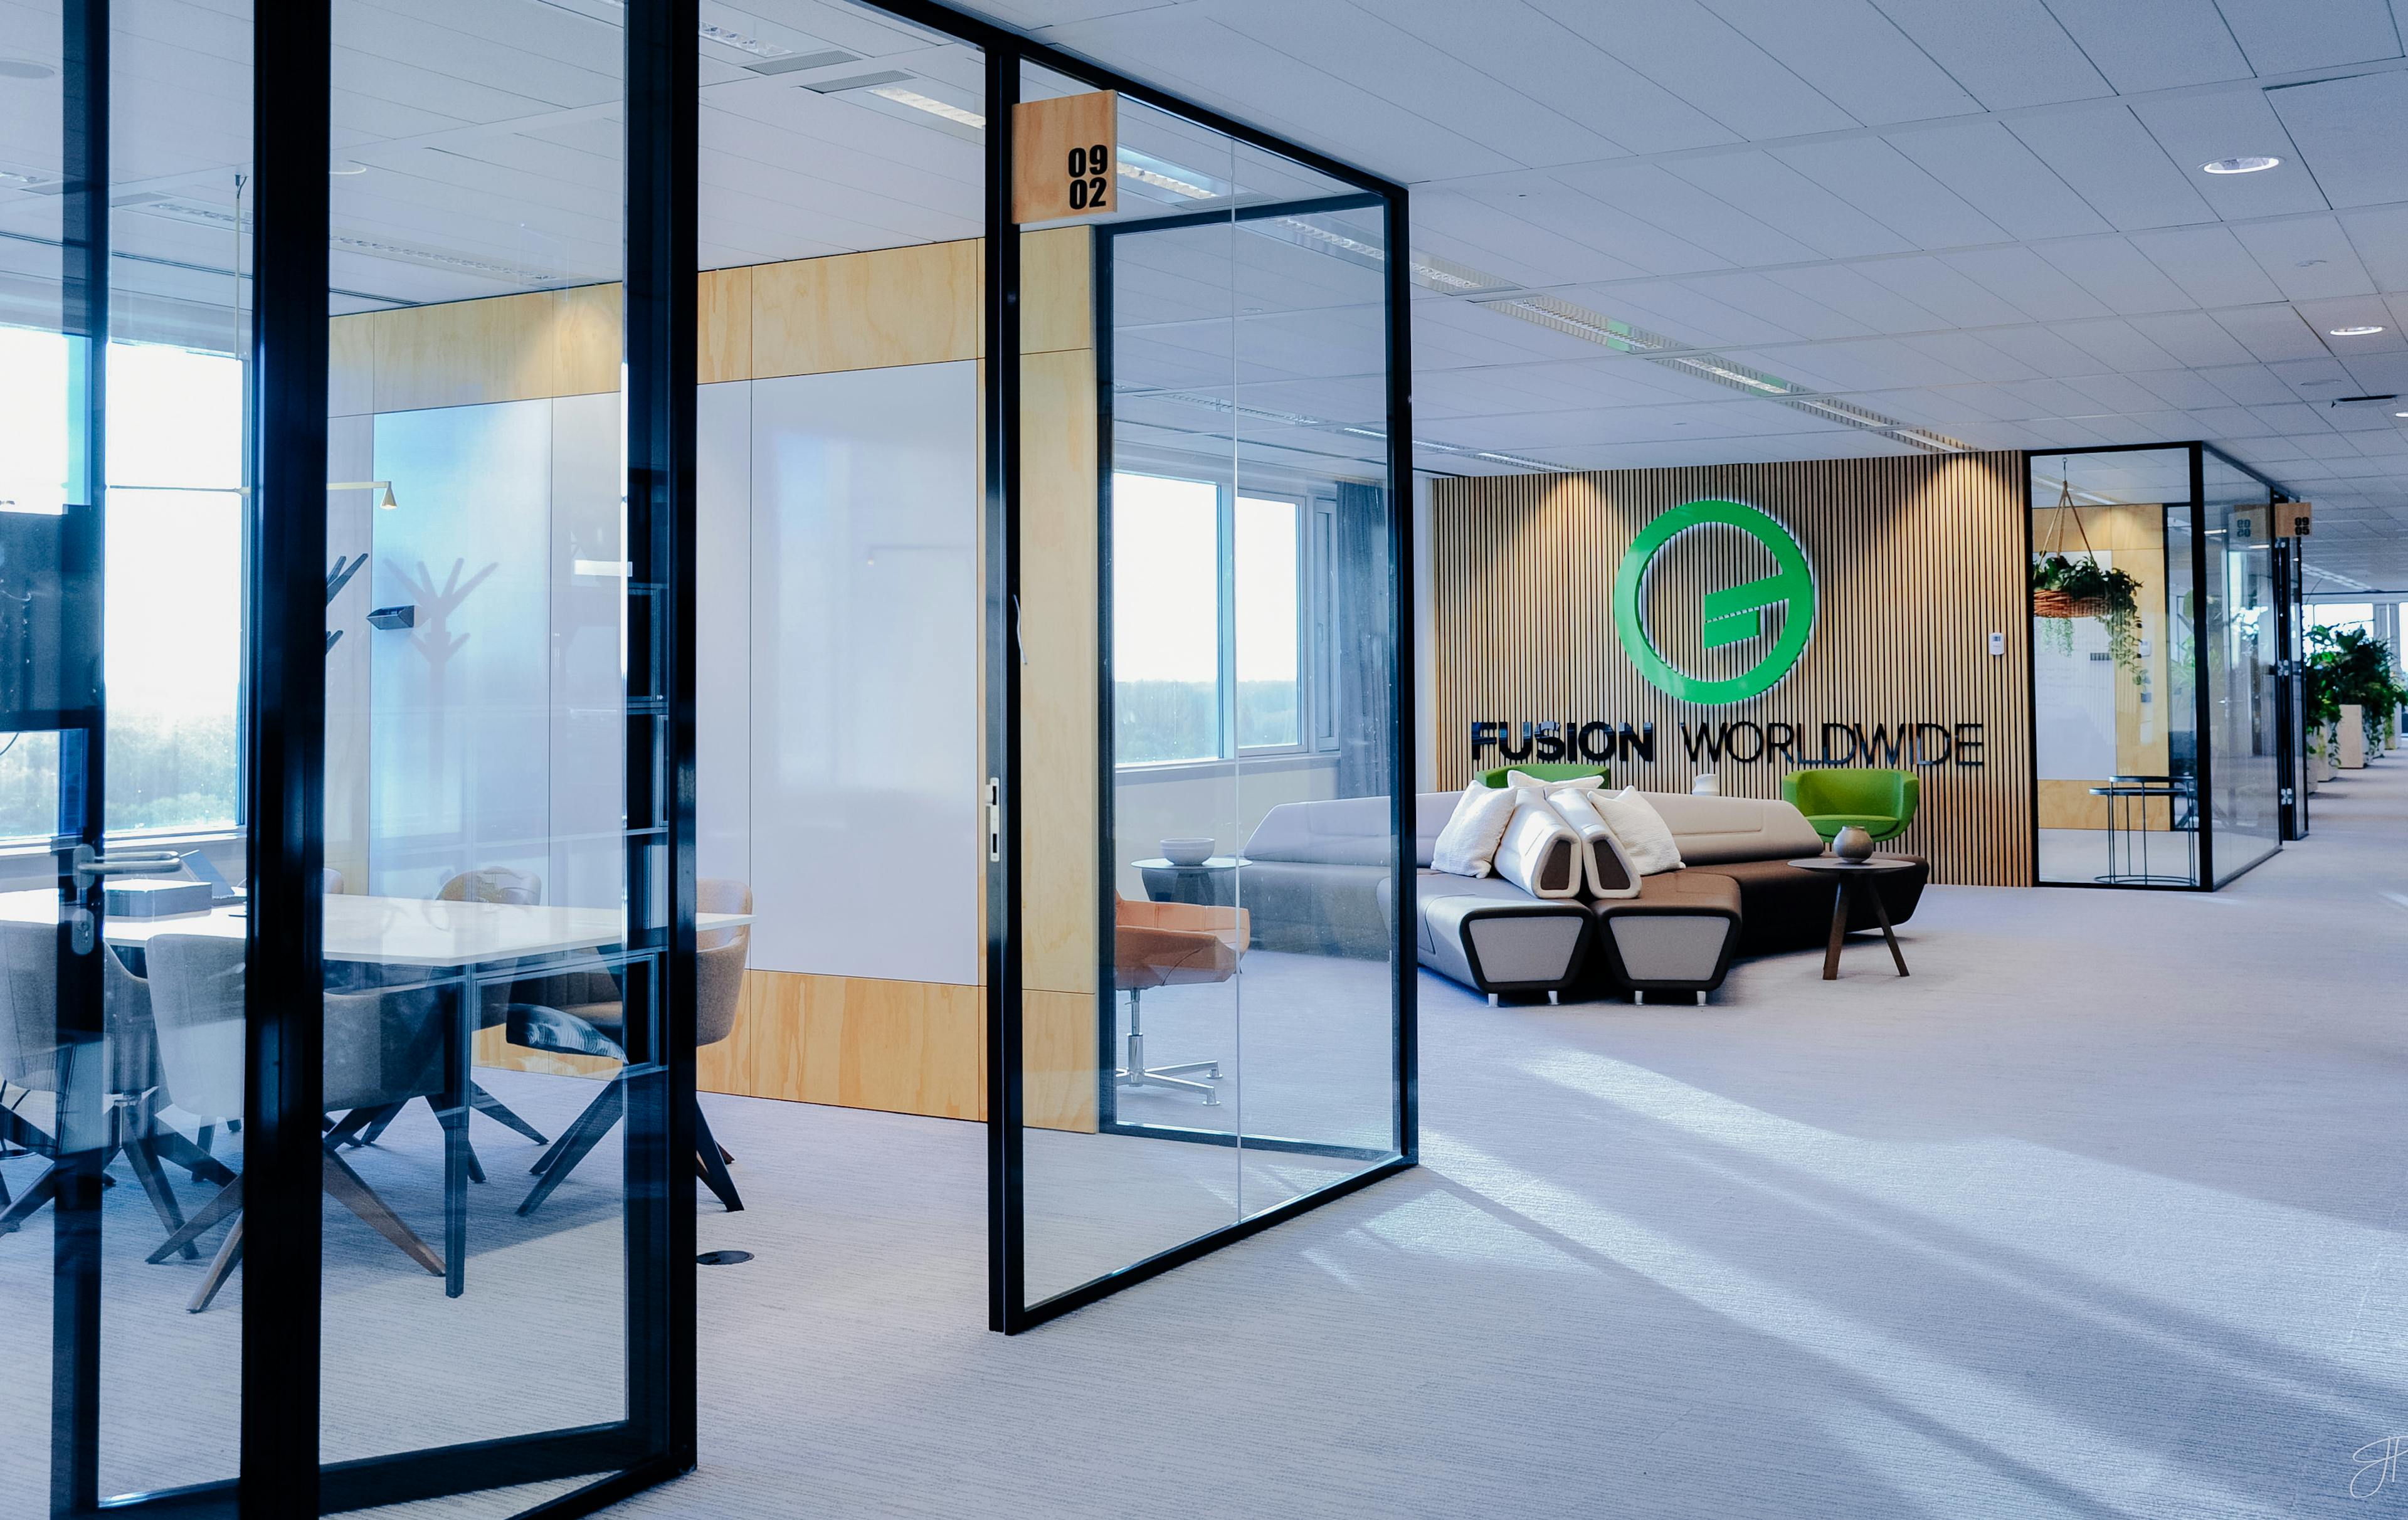 A conference room and waiting area at Fusion Worldwide's office in Amsterdam, Netherlands